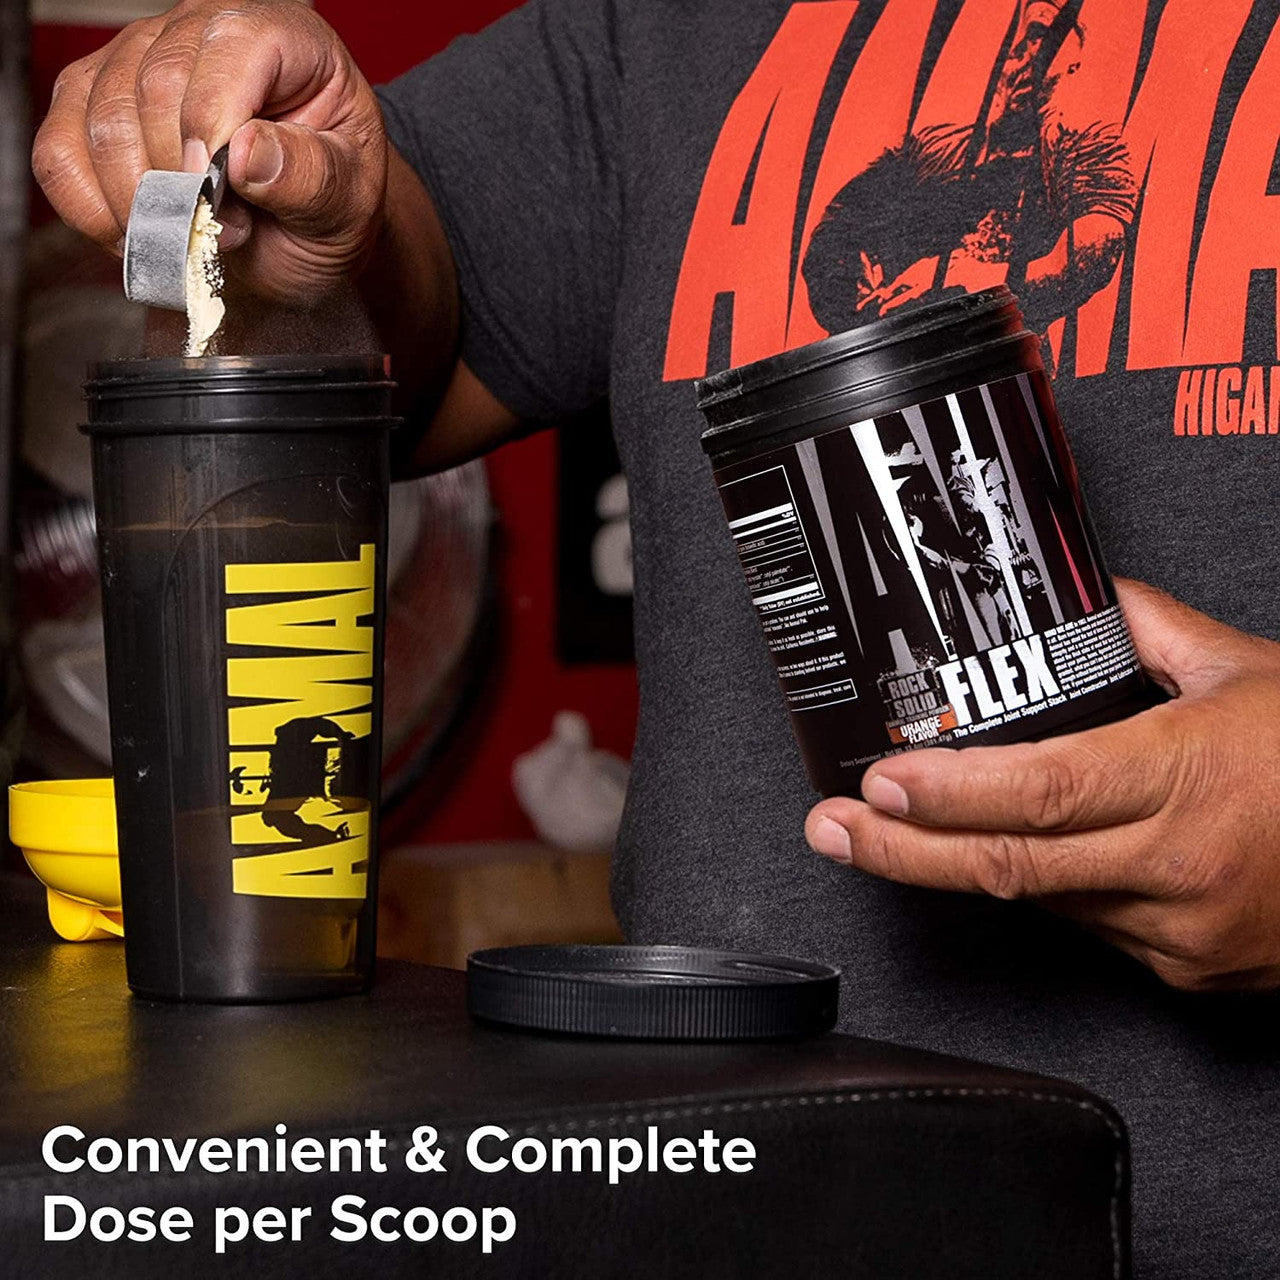 Animal Flex: Complete Joint Support Supplement Stack – Animal Pak